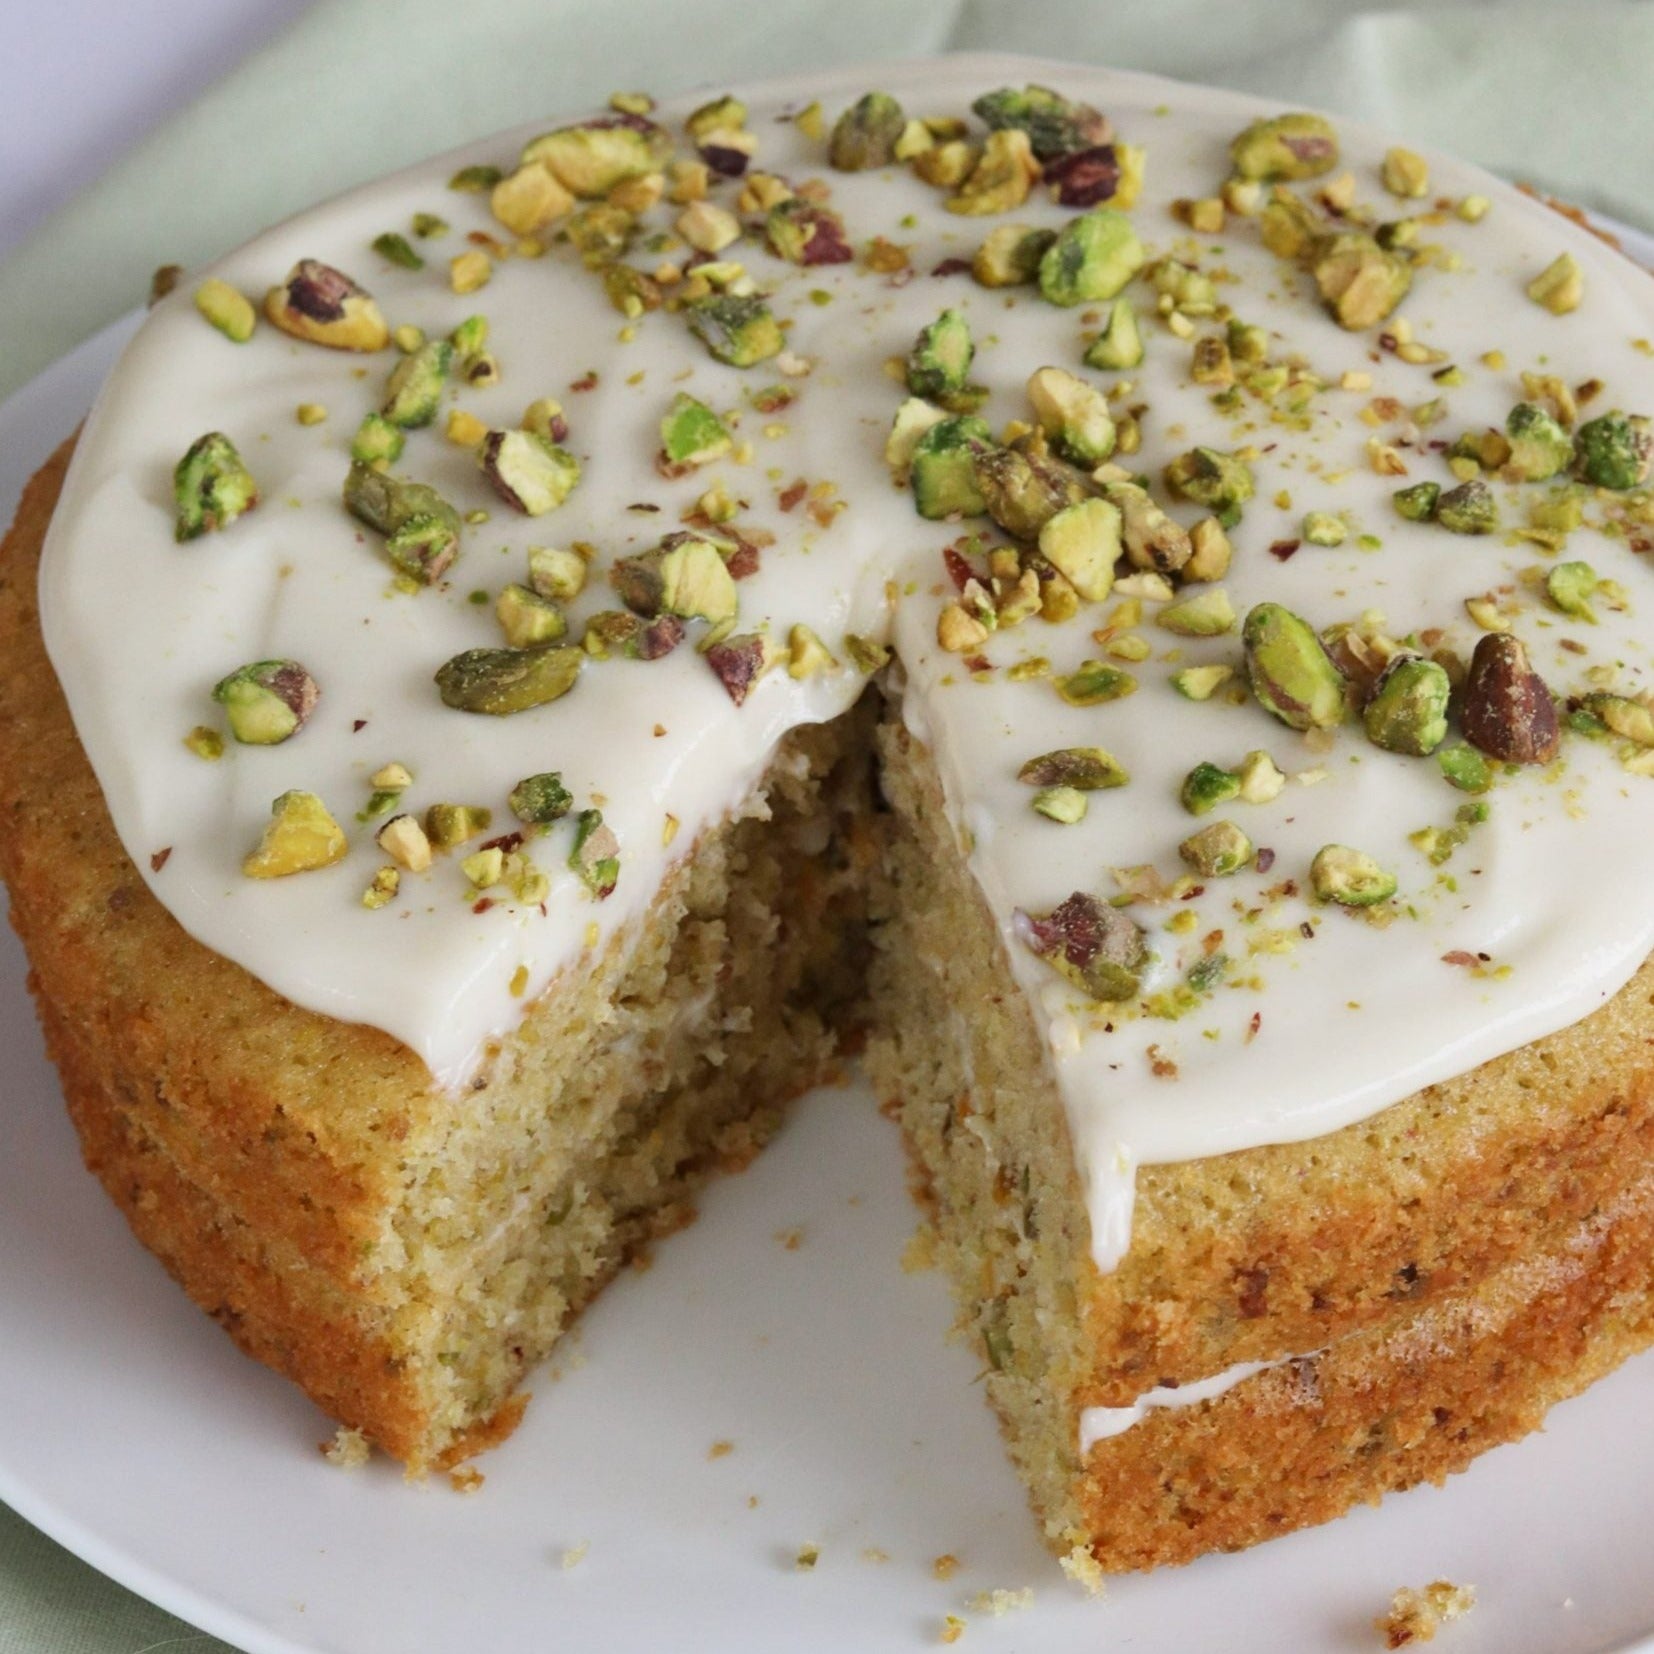 Experience a unique blend of flavors with our signature Matcha Cardamom Carrot Cake. Indulge in the rich earthy taste of matcha combined with the warmth of cardamom, all beautifully intertwined with the freshness of carrot.